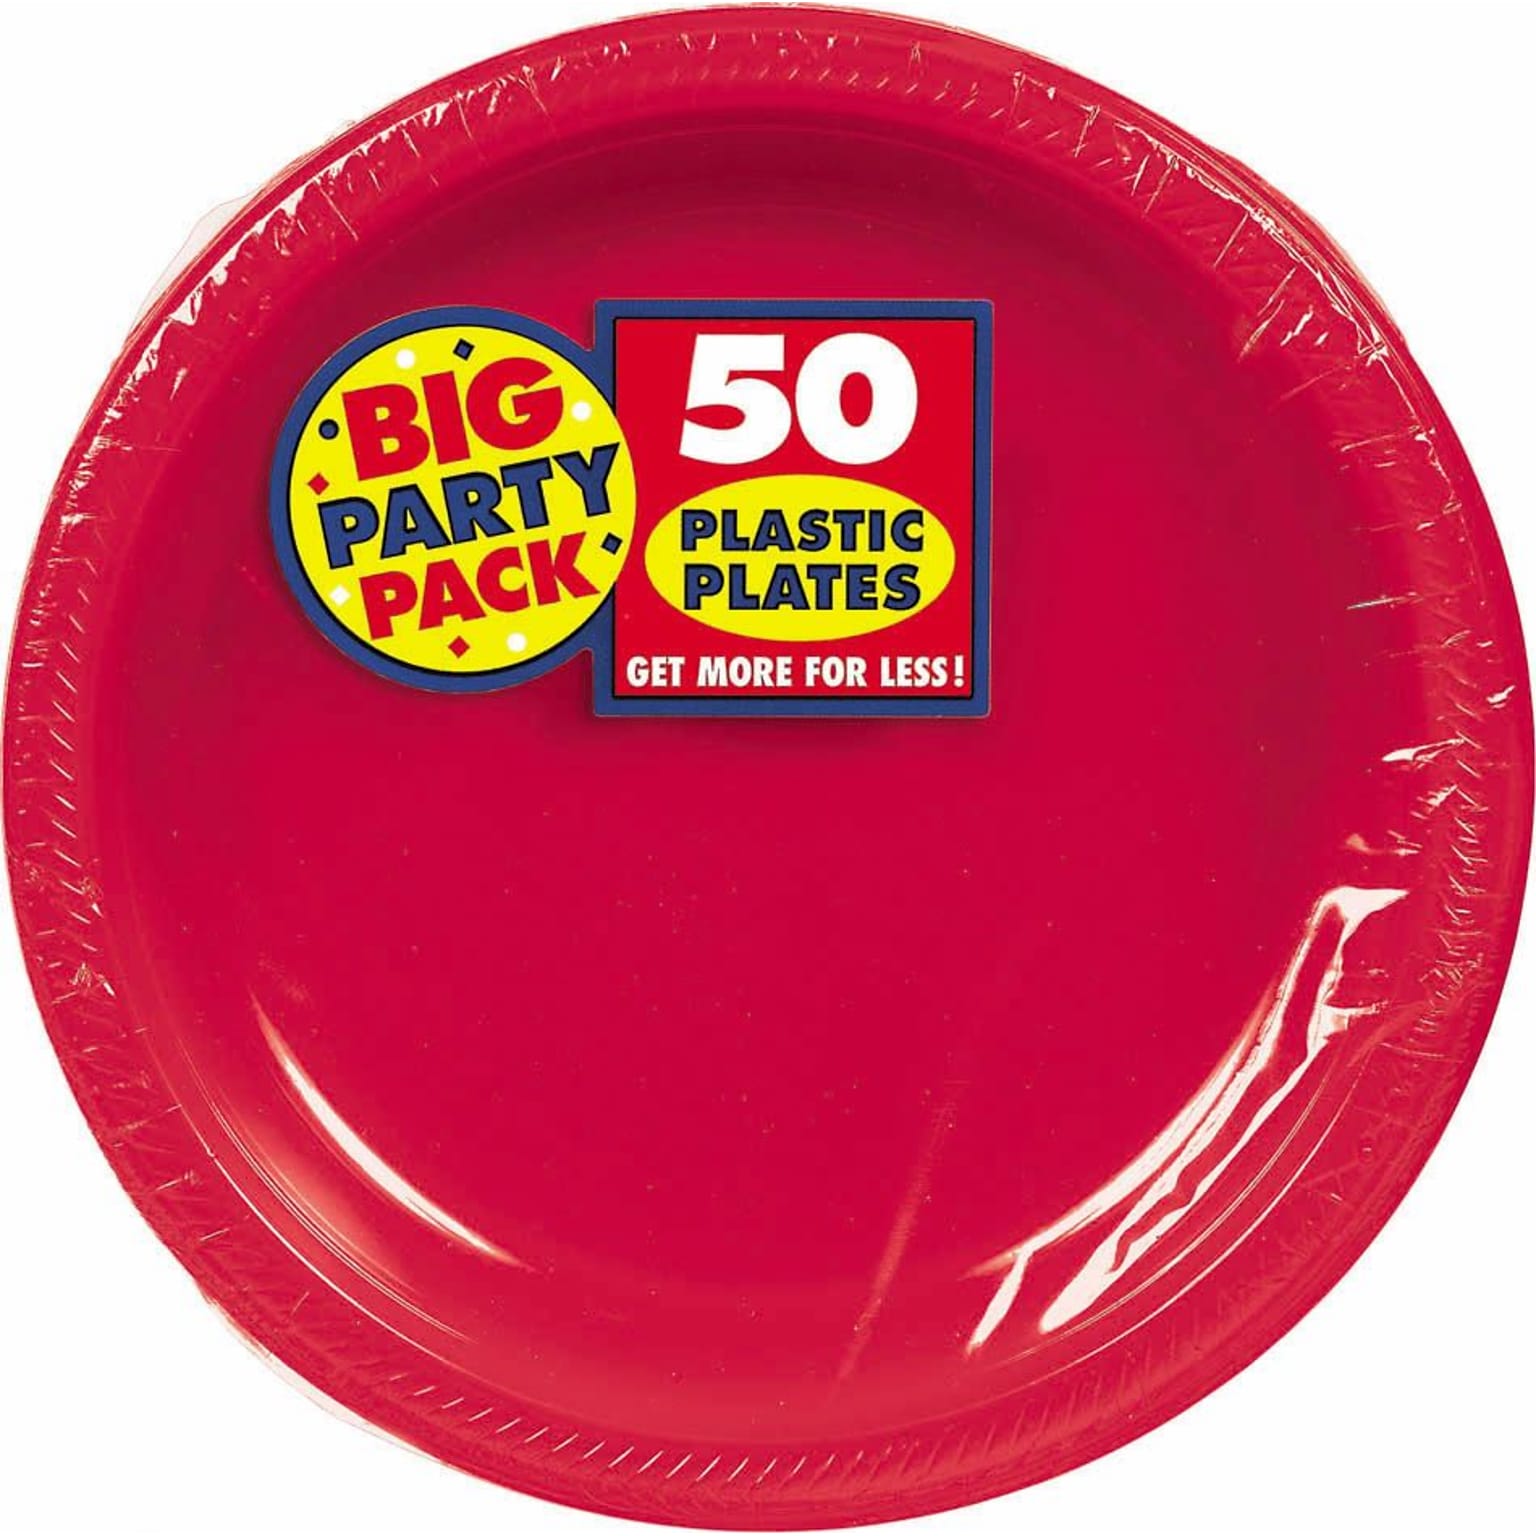 Amscan Big Party Pack Plastic Plates, 7W Round, Apple Red, 3/Pack, 50 Per Pack (630730.4)